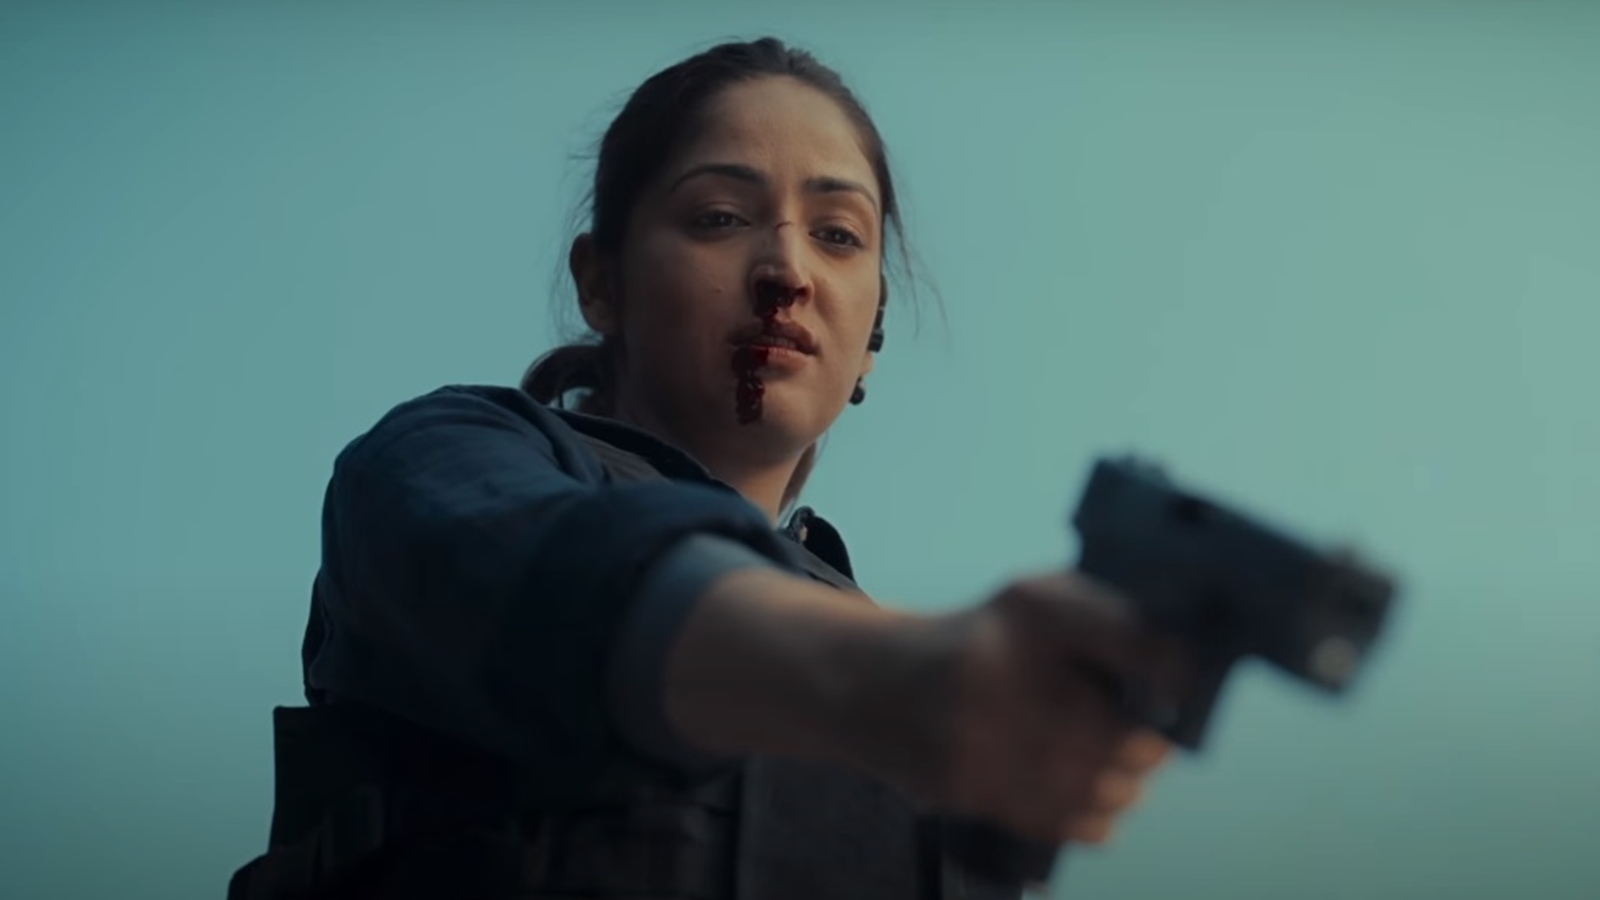 Article 370 trailer: Yami Gautam-starrer political film is for The Kashmir  Files audience. Watch | Bollywood News - The Indian Express